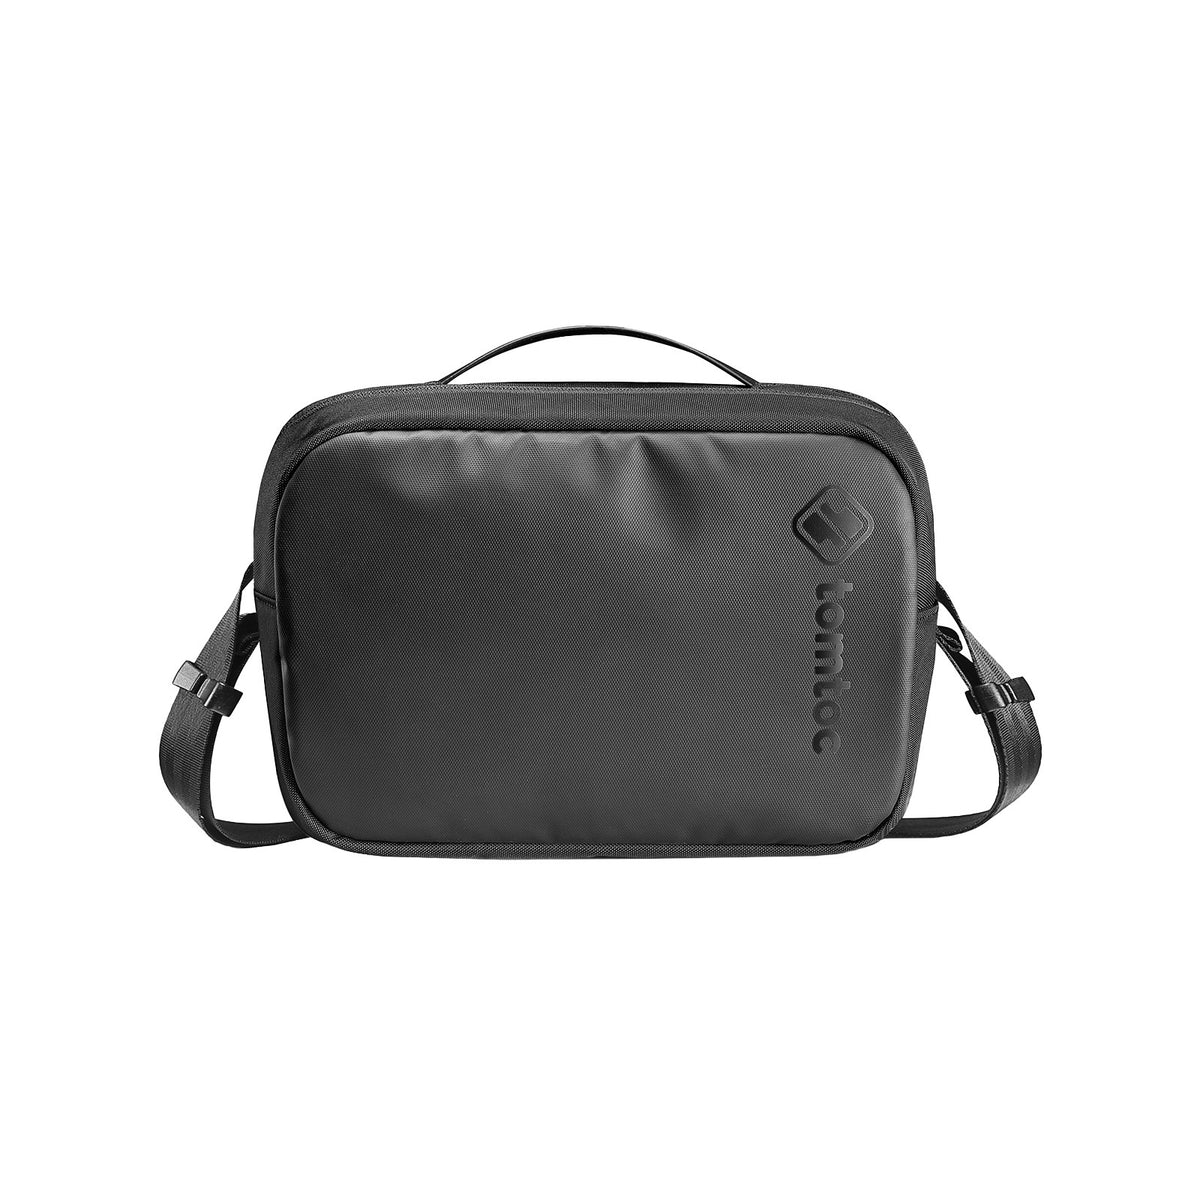 primary_Explorer-H02 Shoulder Bag for iPad Air 10.9-inch /iPad Pro 11-inch